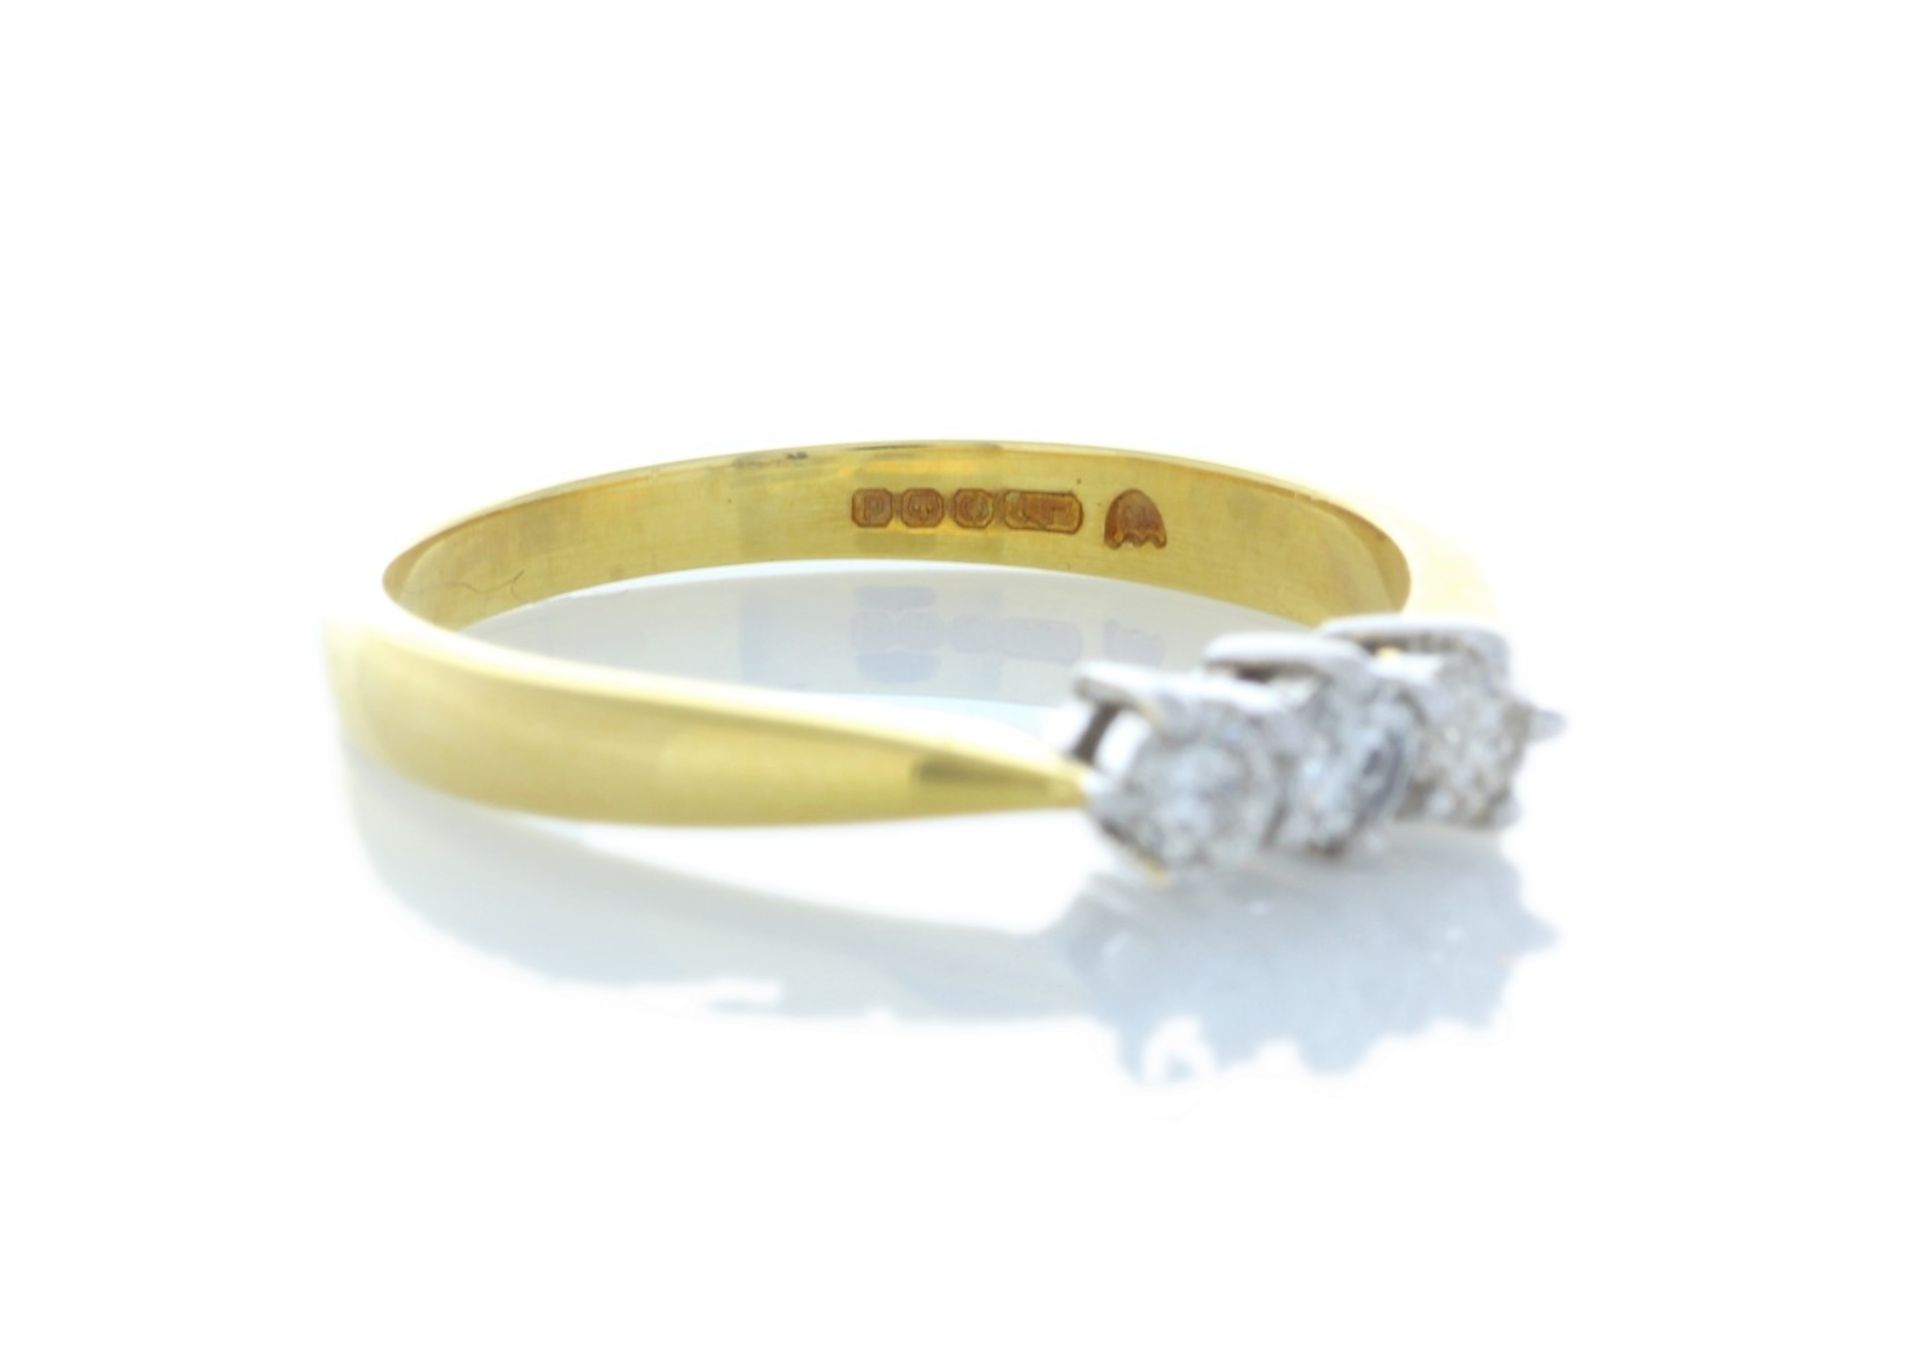 9ct Yellow Gold Three Stone Claw Set Diamond Ring 0.25 Carats - Valued by AGI £957.00 - 9ct Yellow - Image 4 of 4